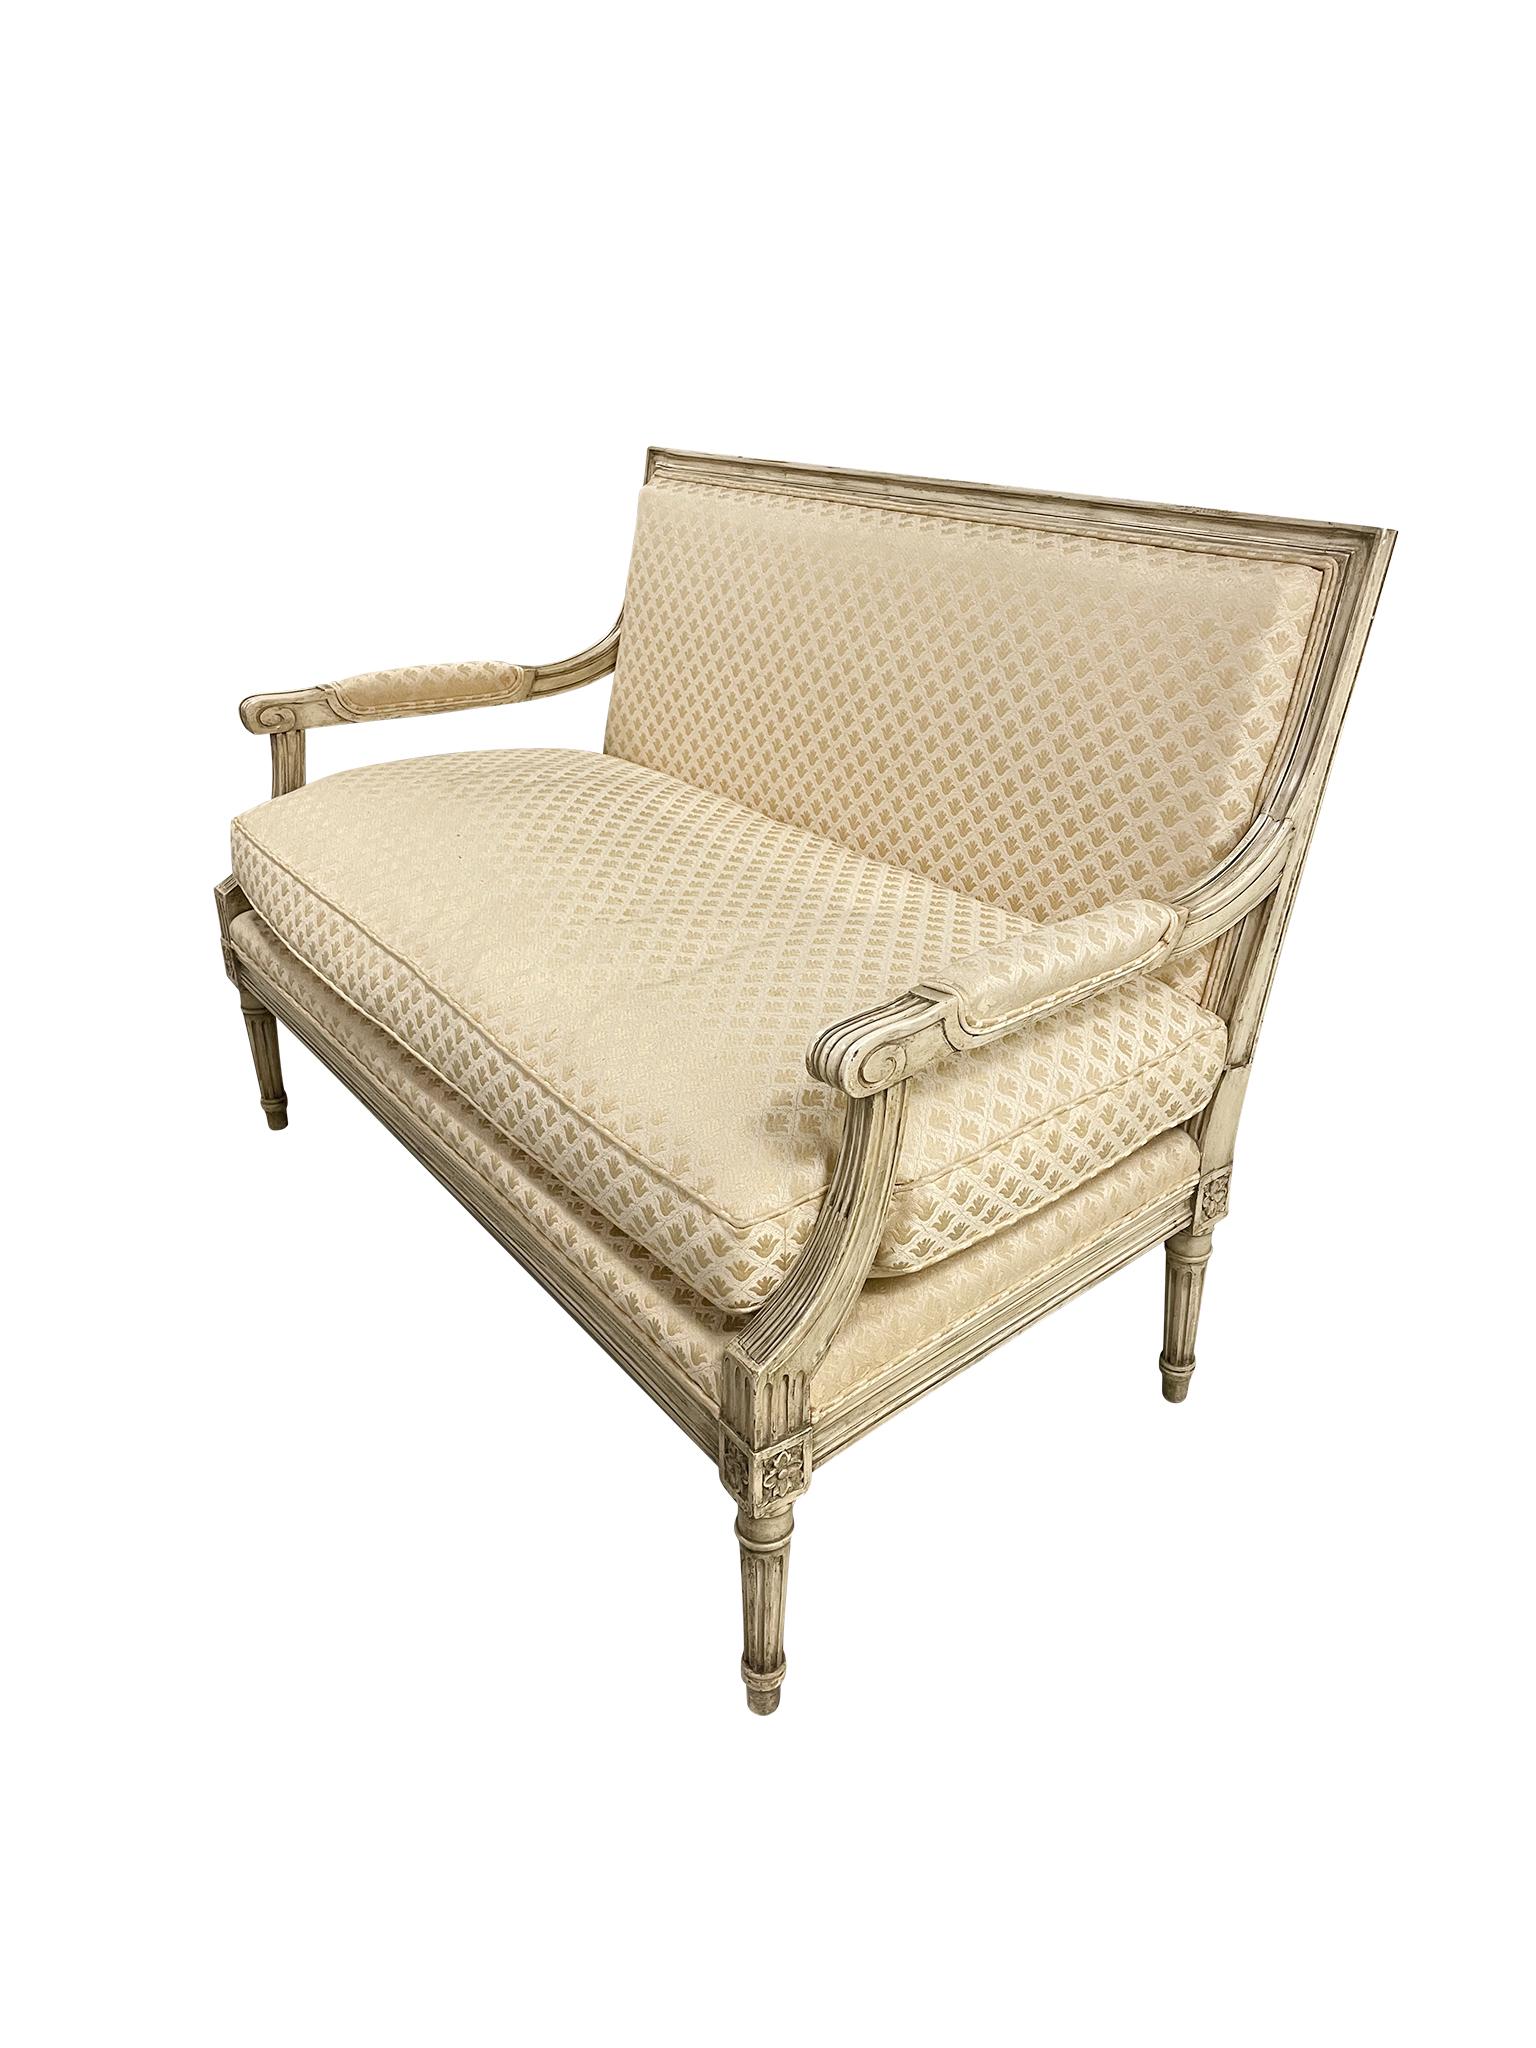 This classic Louis XVI-style settee was made in the 1920s. Its comprised of a painted, wood frame upholstered with fleur-de-lis patterned fabric. The arms are padded with the same fabric and meet the legs in a curved, fluted